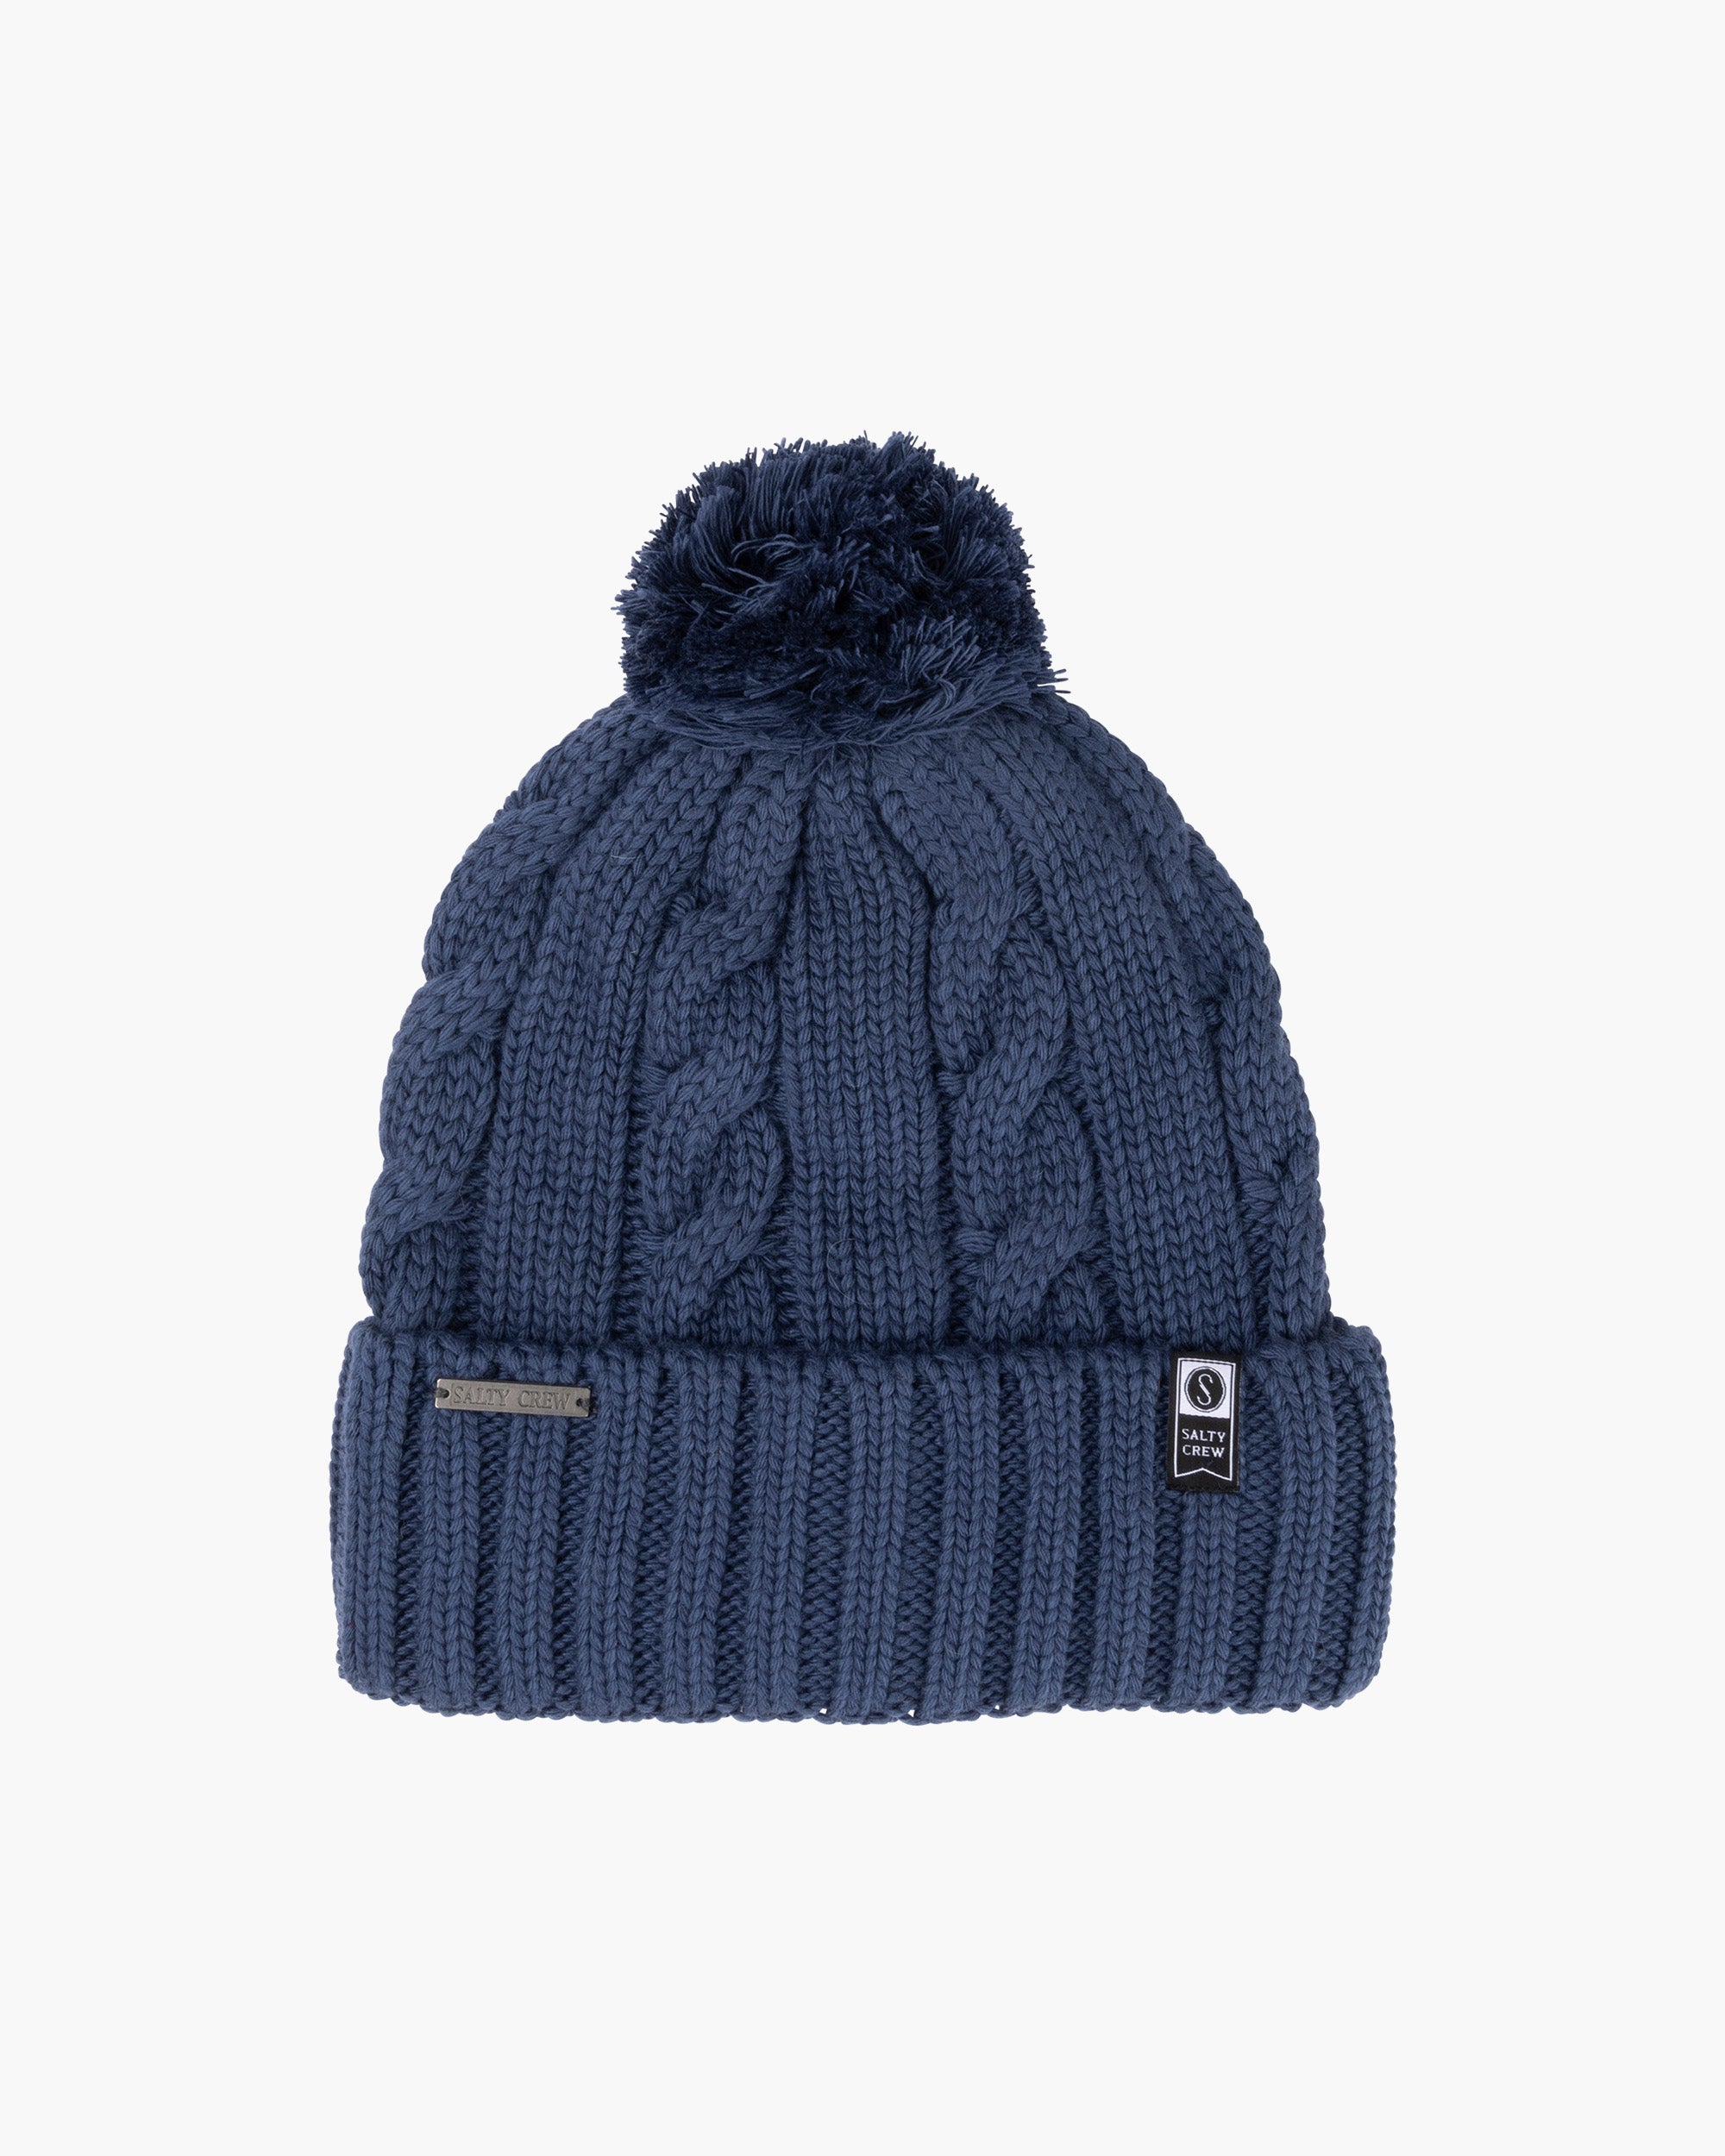 THE WAVE BEANIE - Athletic Heather